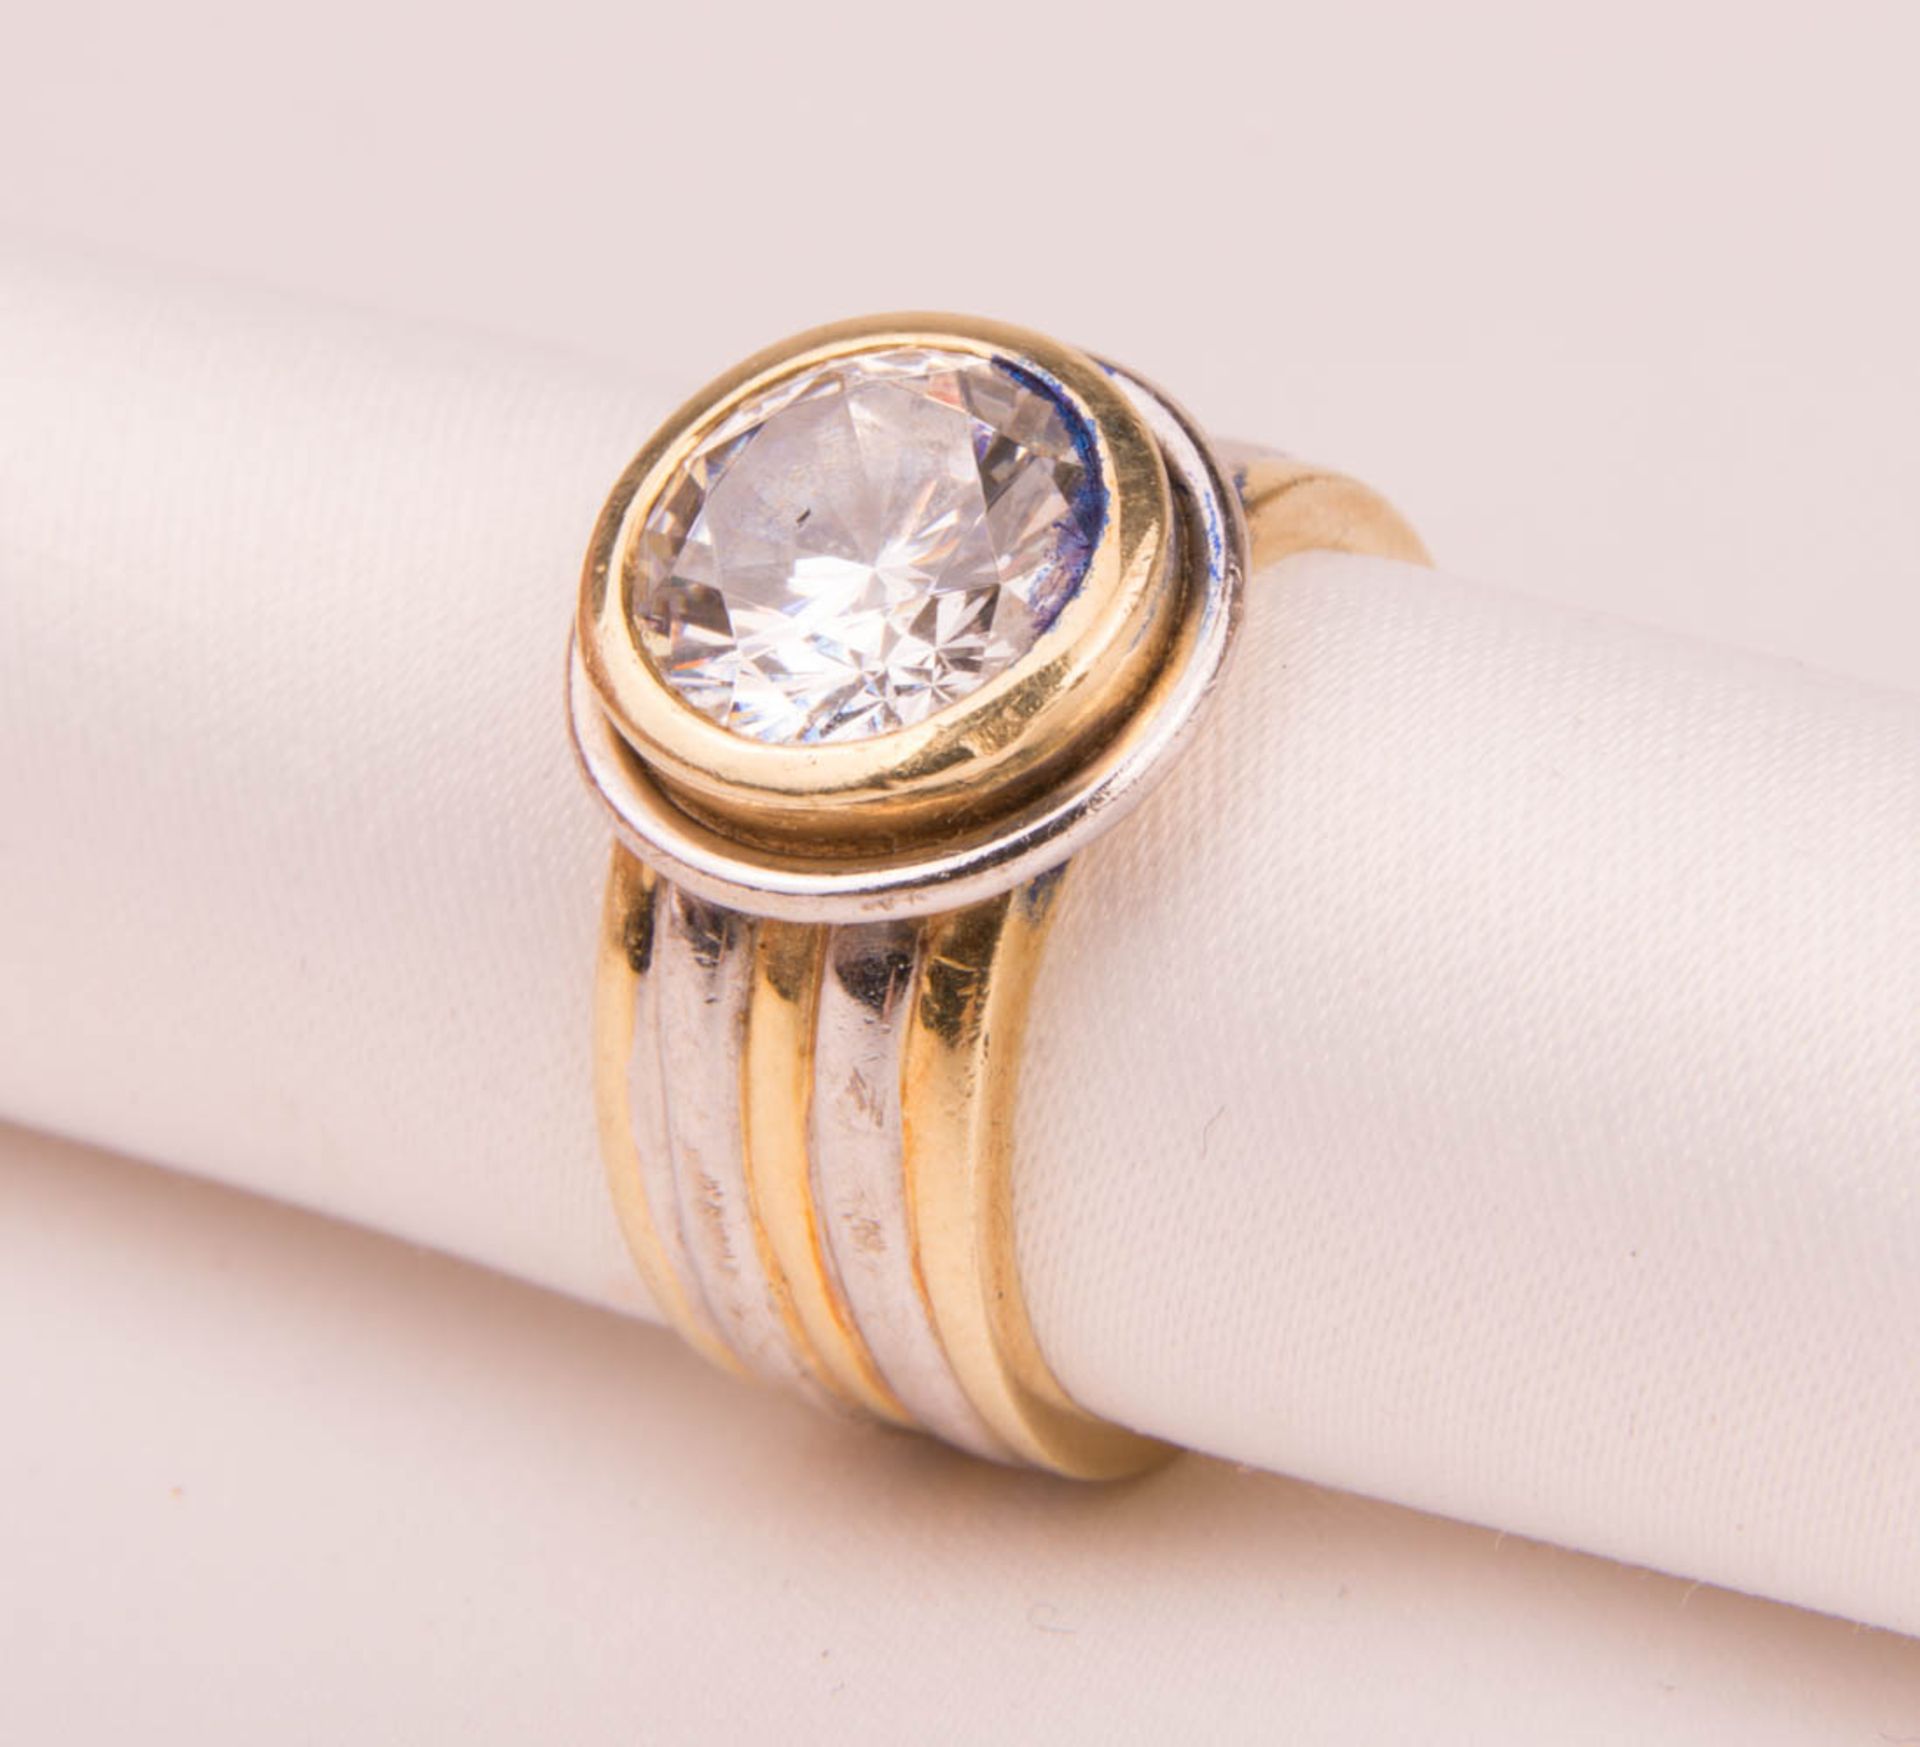 Wide ring with large stone, 585 white and yellow gold. - Image 2 of 6